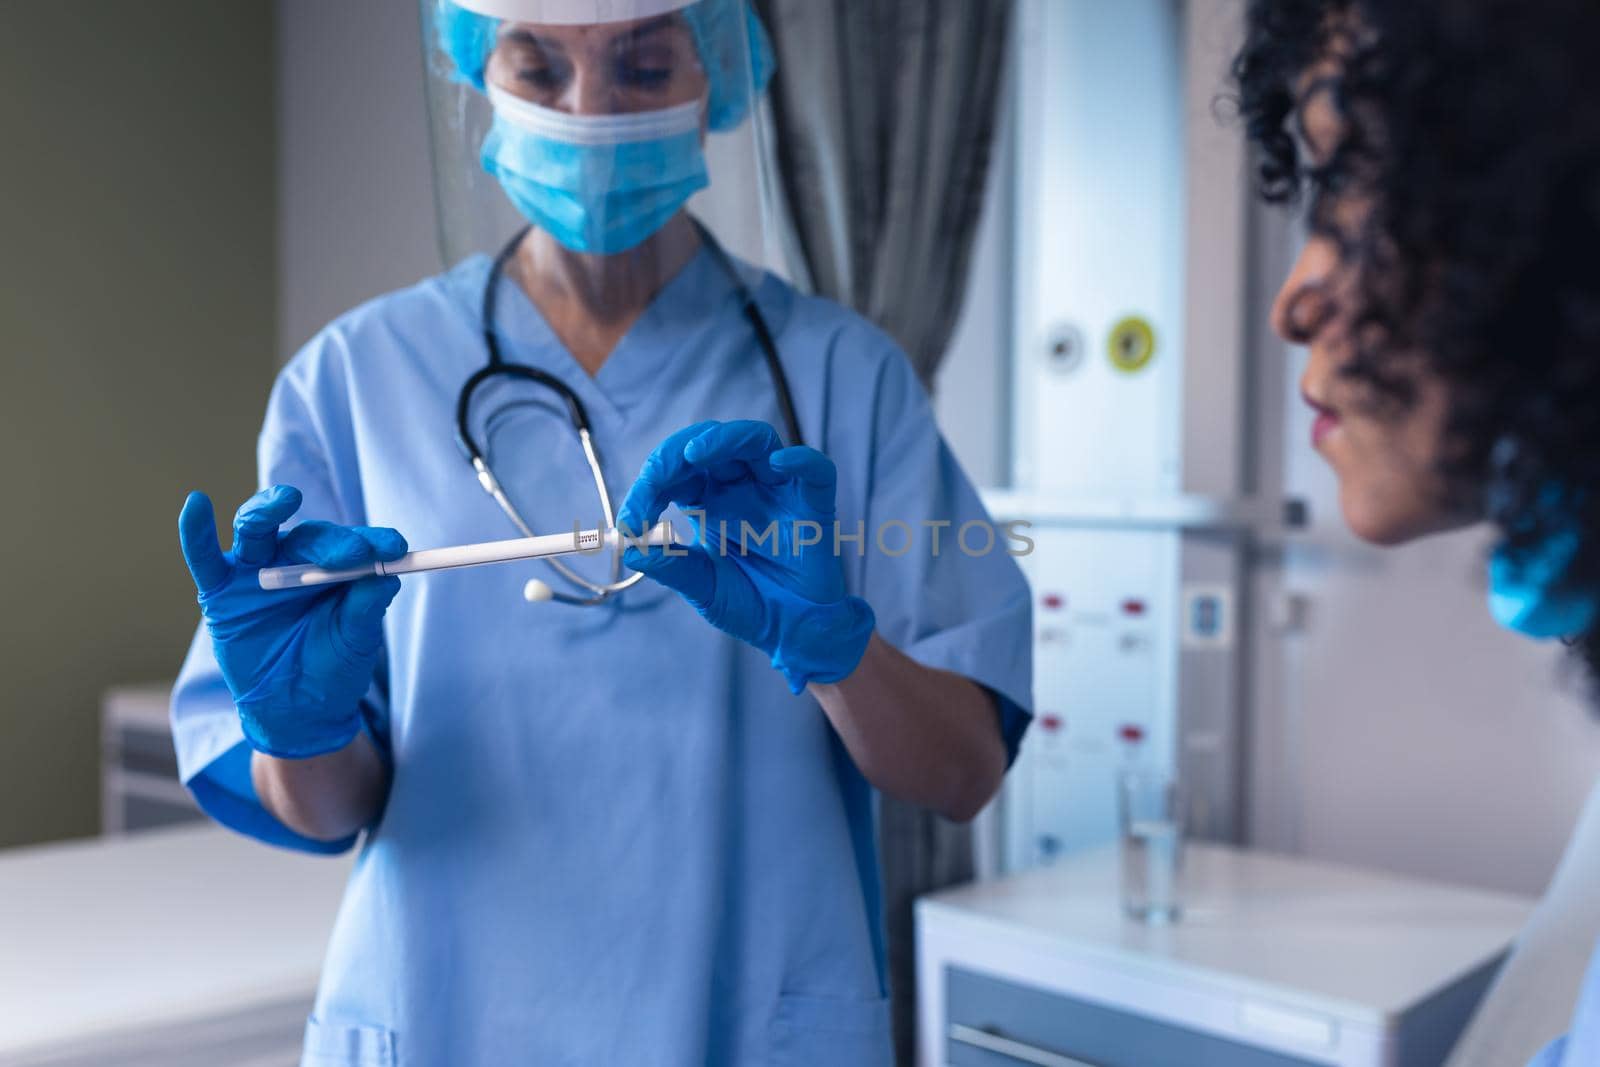 Caucasian female doctor in hospital wearing face mask holding swab test next to female patient. medical professional at work during coronavirus covid 19 pandemic.